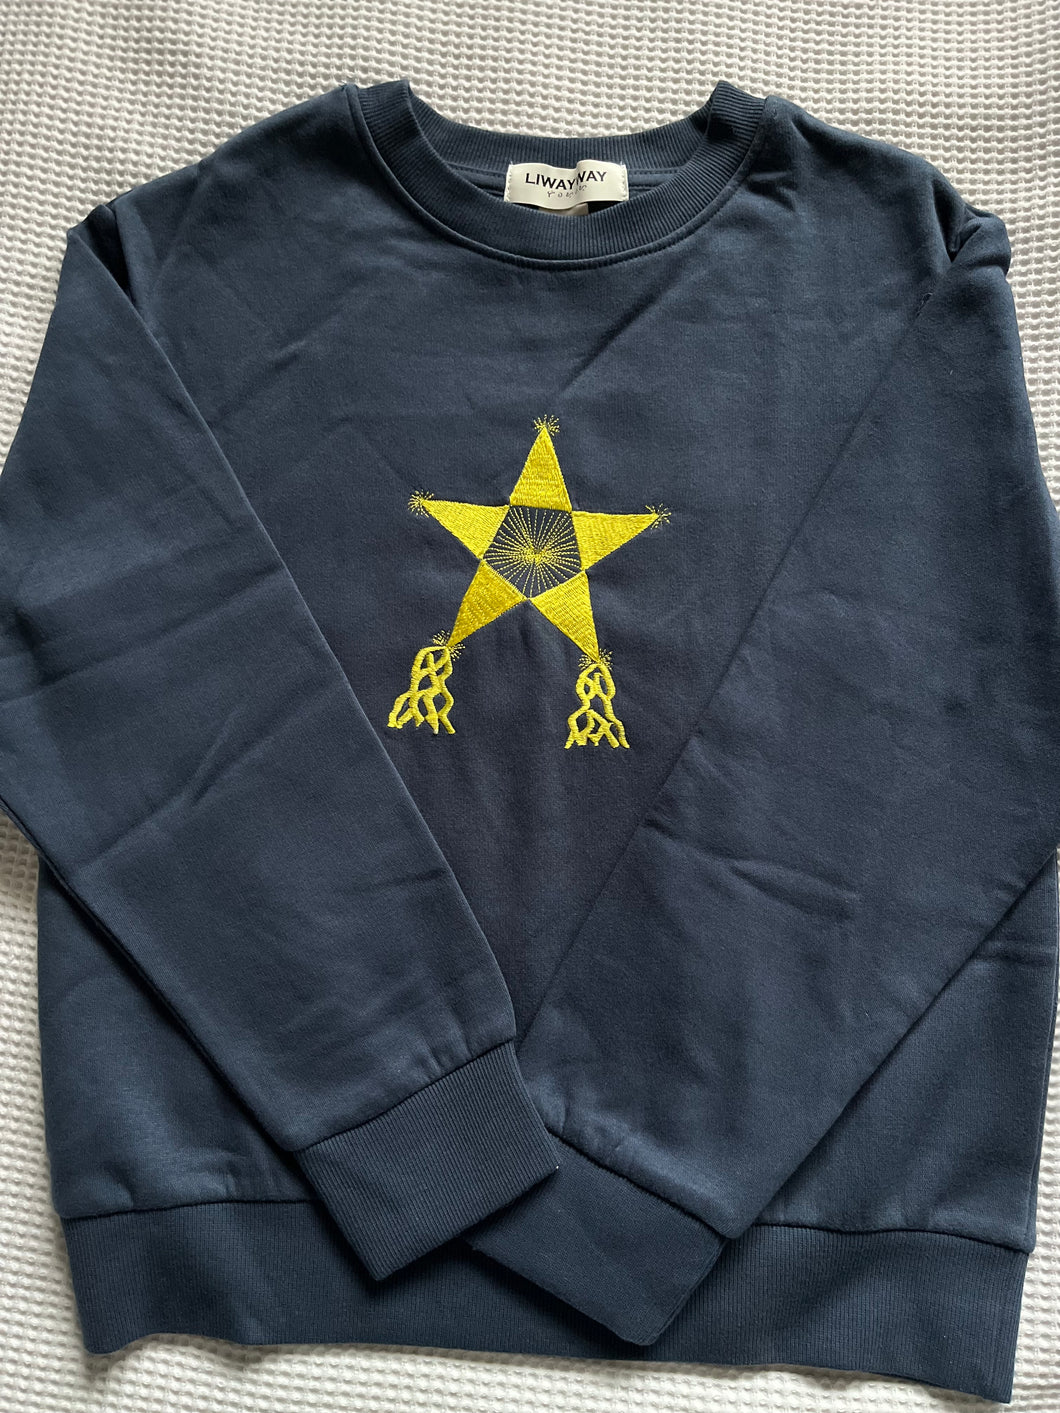 Parol sweater 09 for 8-10yrs old